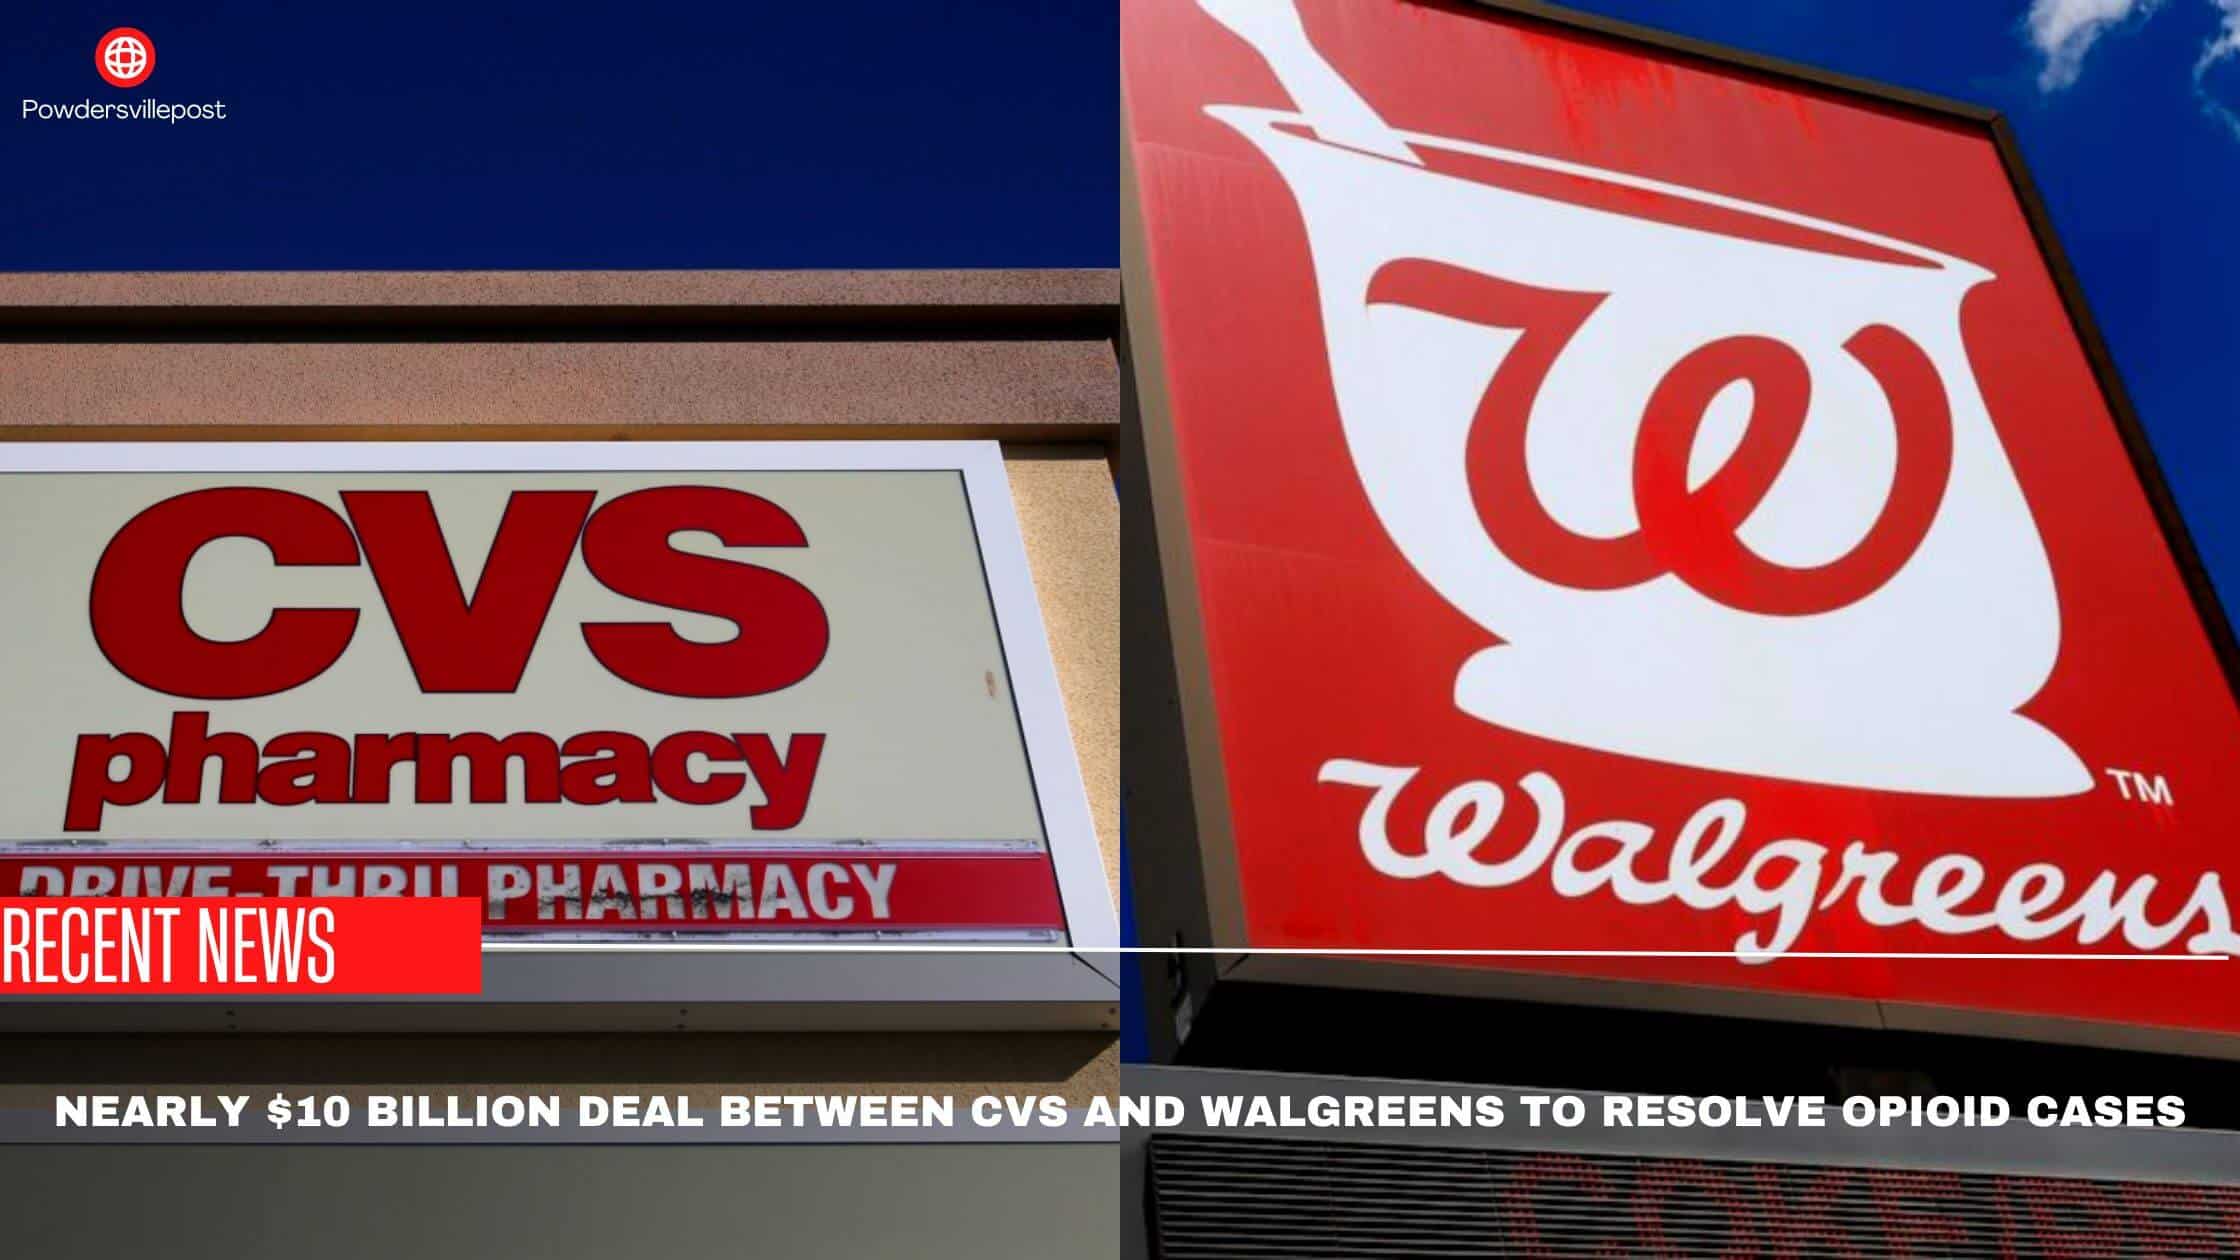 Nearly $10 Billion Deal Between CVS And Walgreens To Resolve Opioid Cases